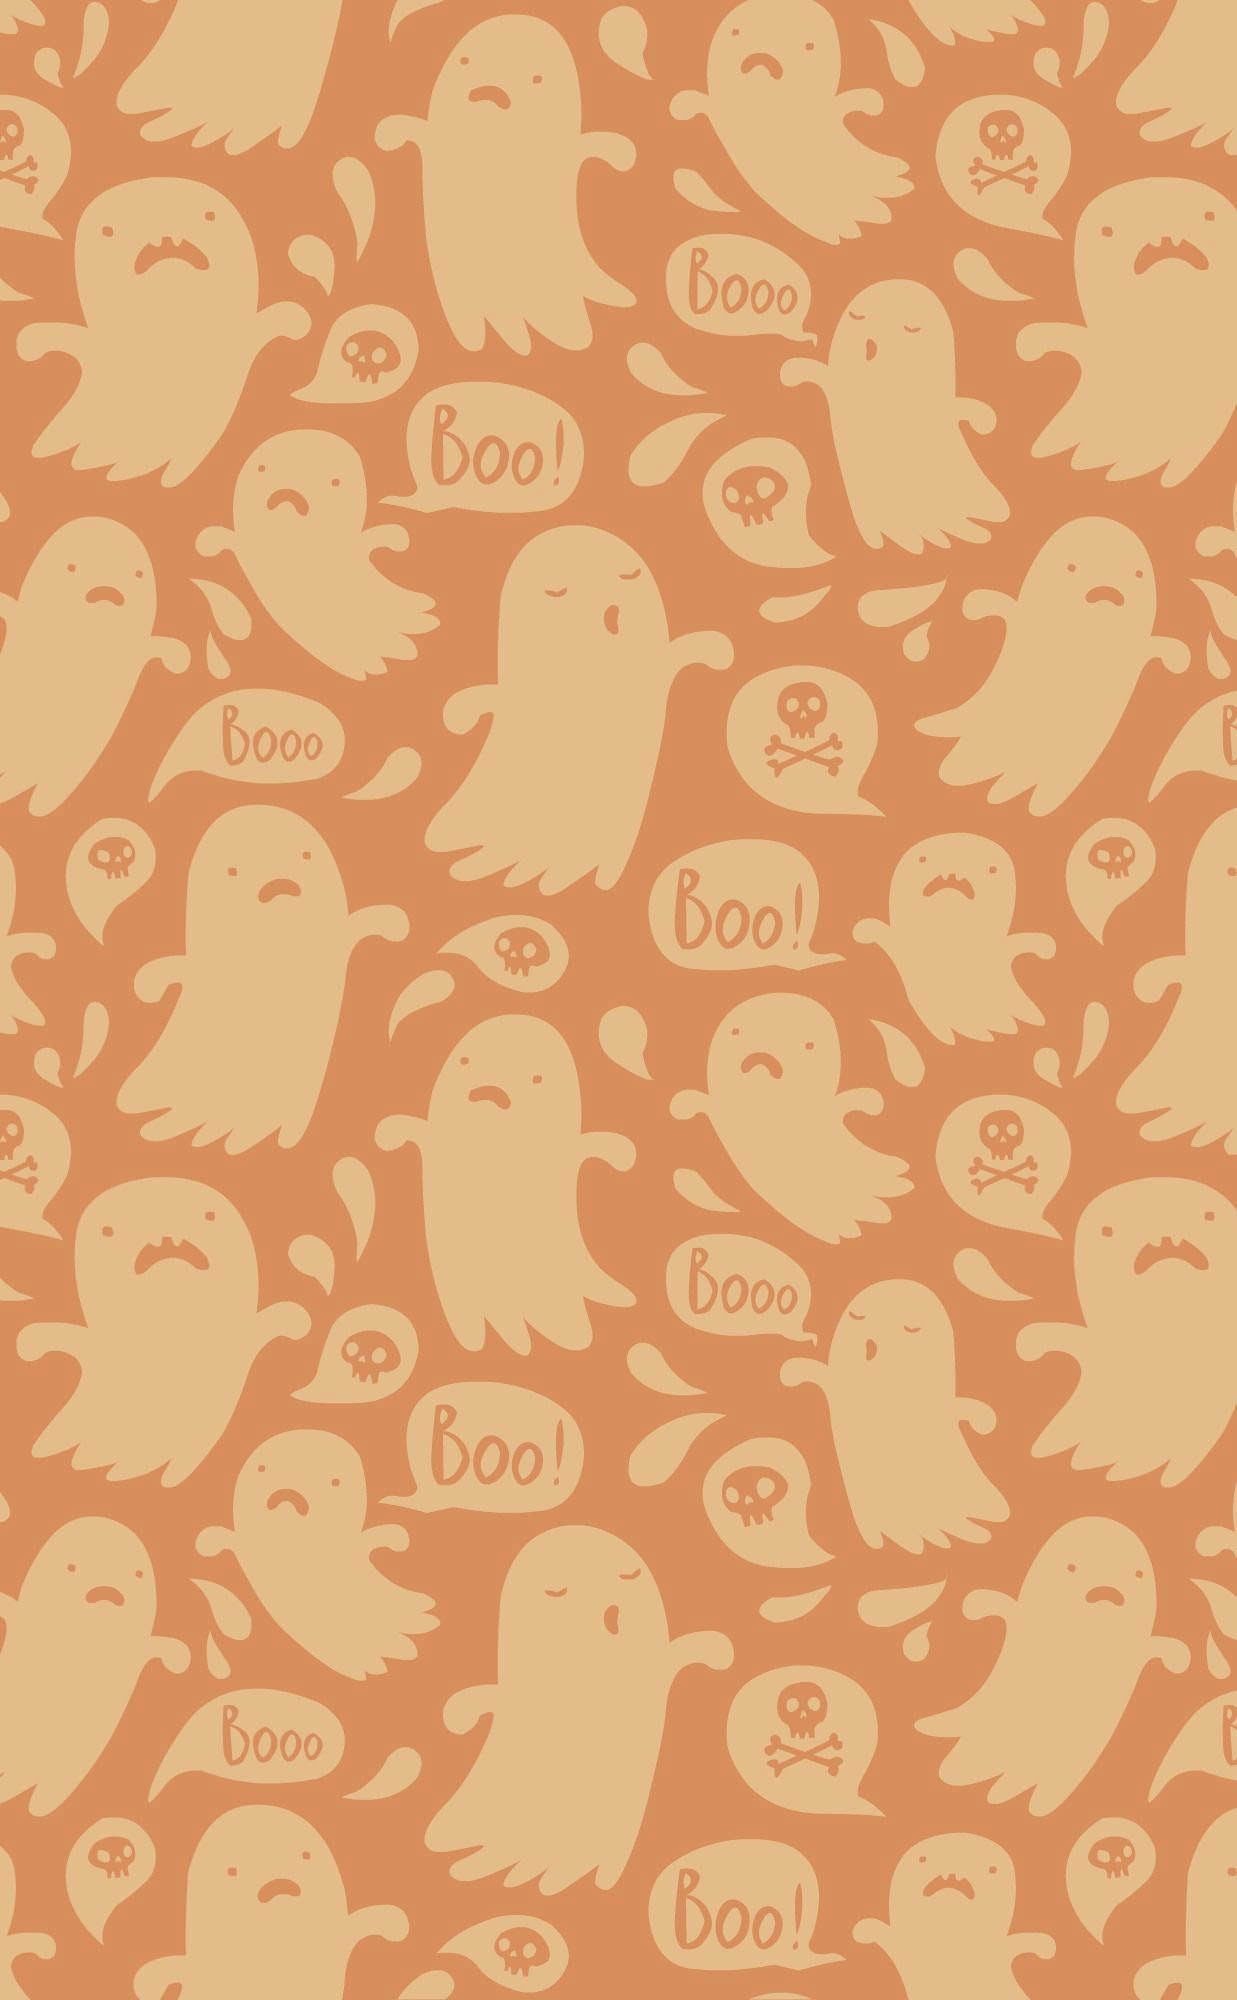 Halloween background with ghosts and the word Boo - Halloween, spooky, ghost, cute Halloween